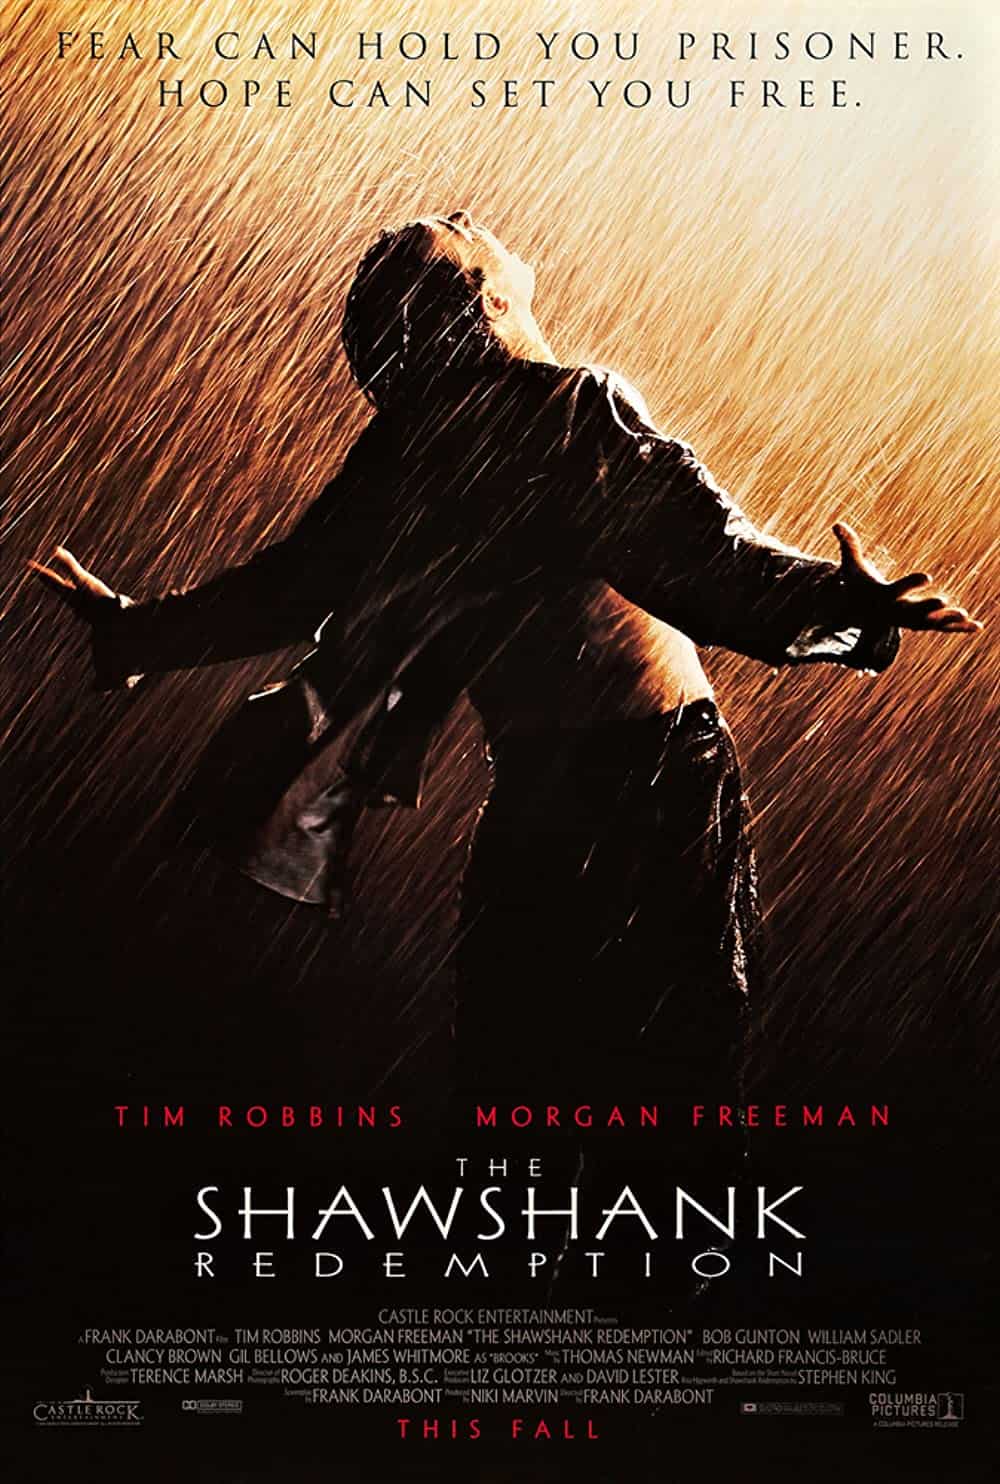 Best Prison Movies You Can't Miss The Shawshank Redemption (1994)